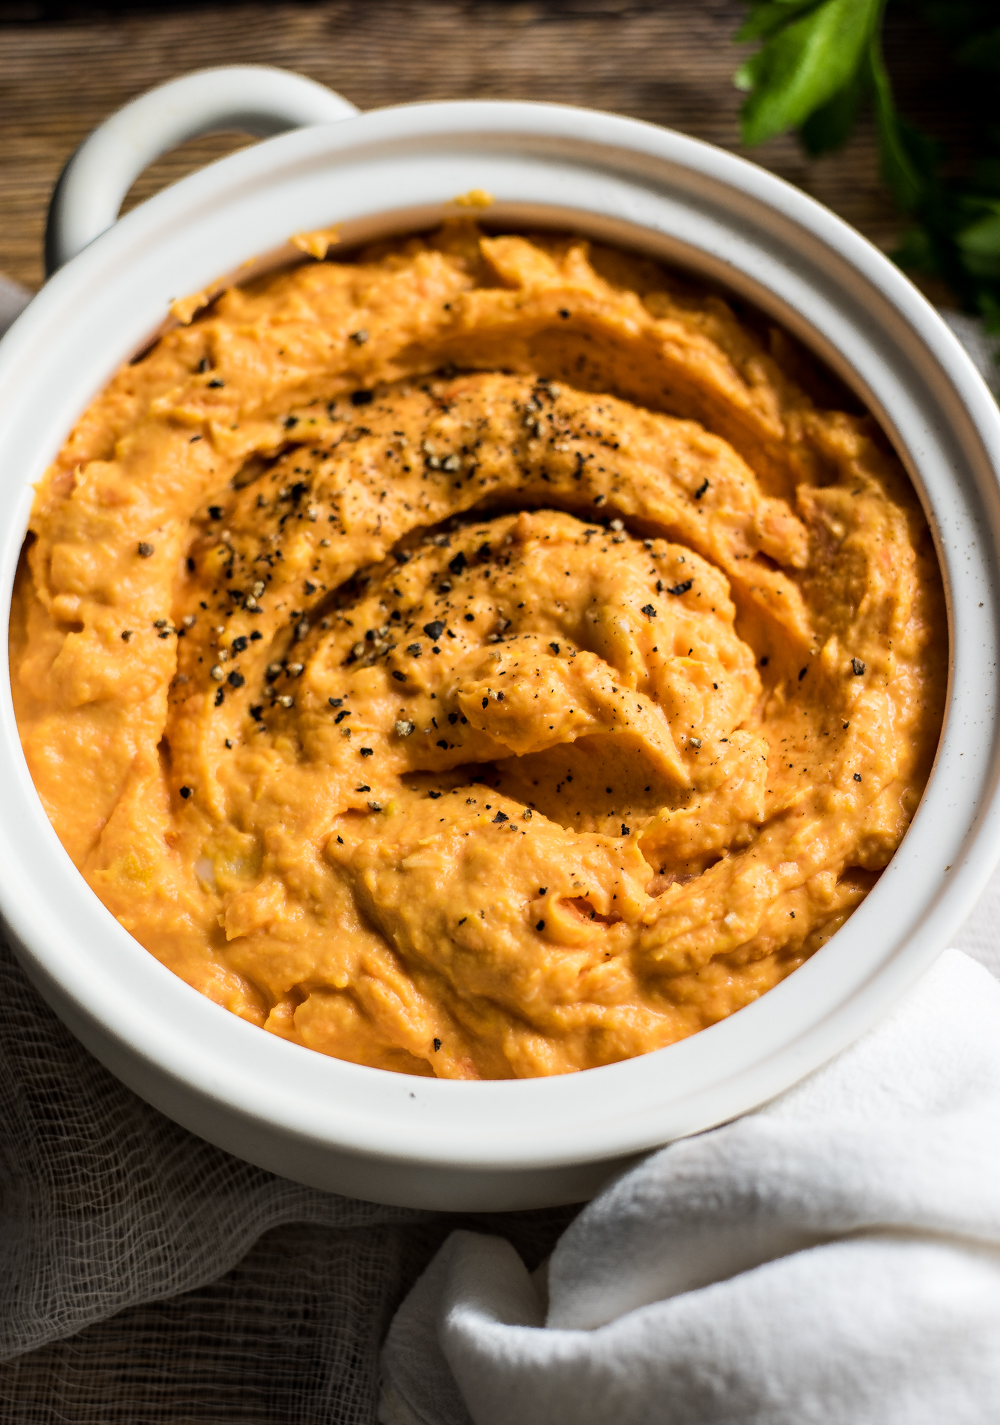 Roasted garlic mashed sweet potatoes and carrots is the perfect side dish to serve this fall!